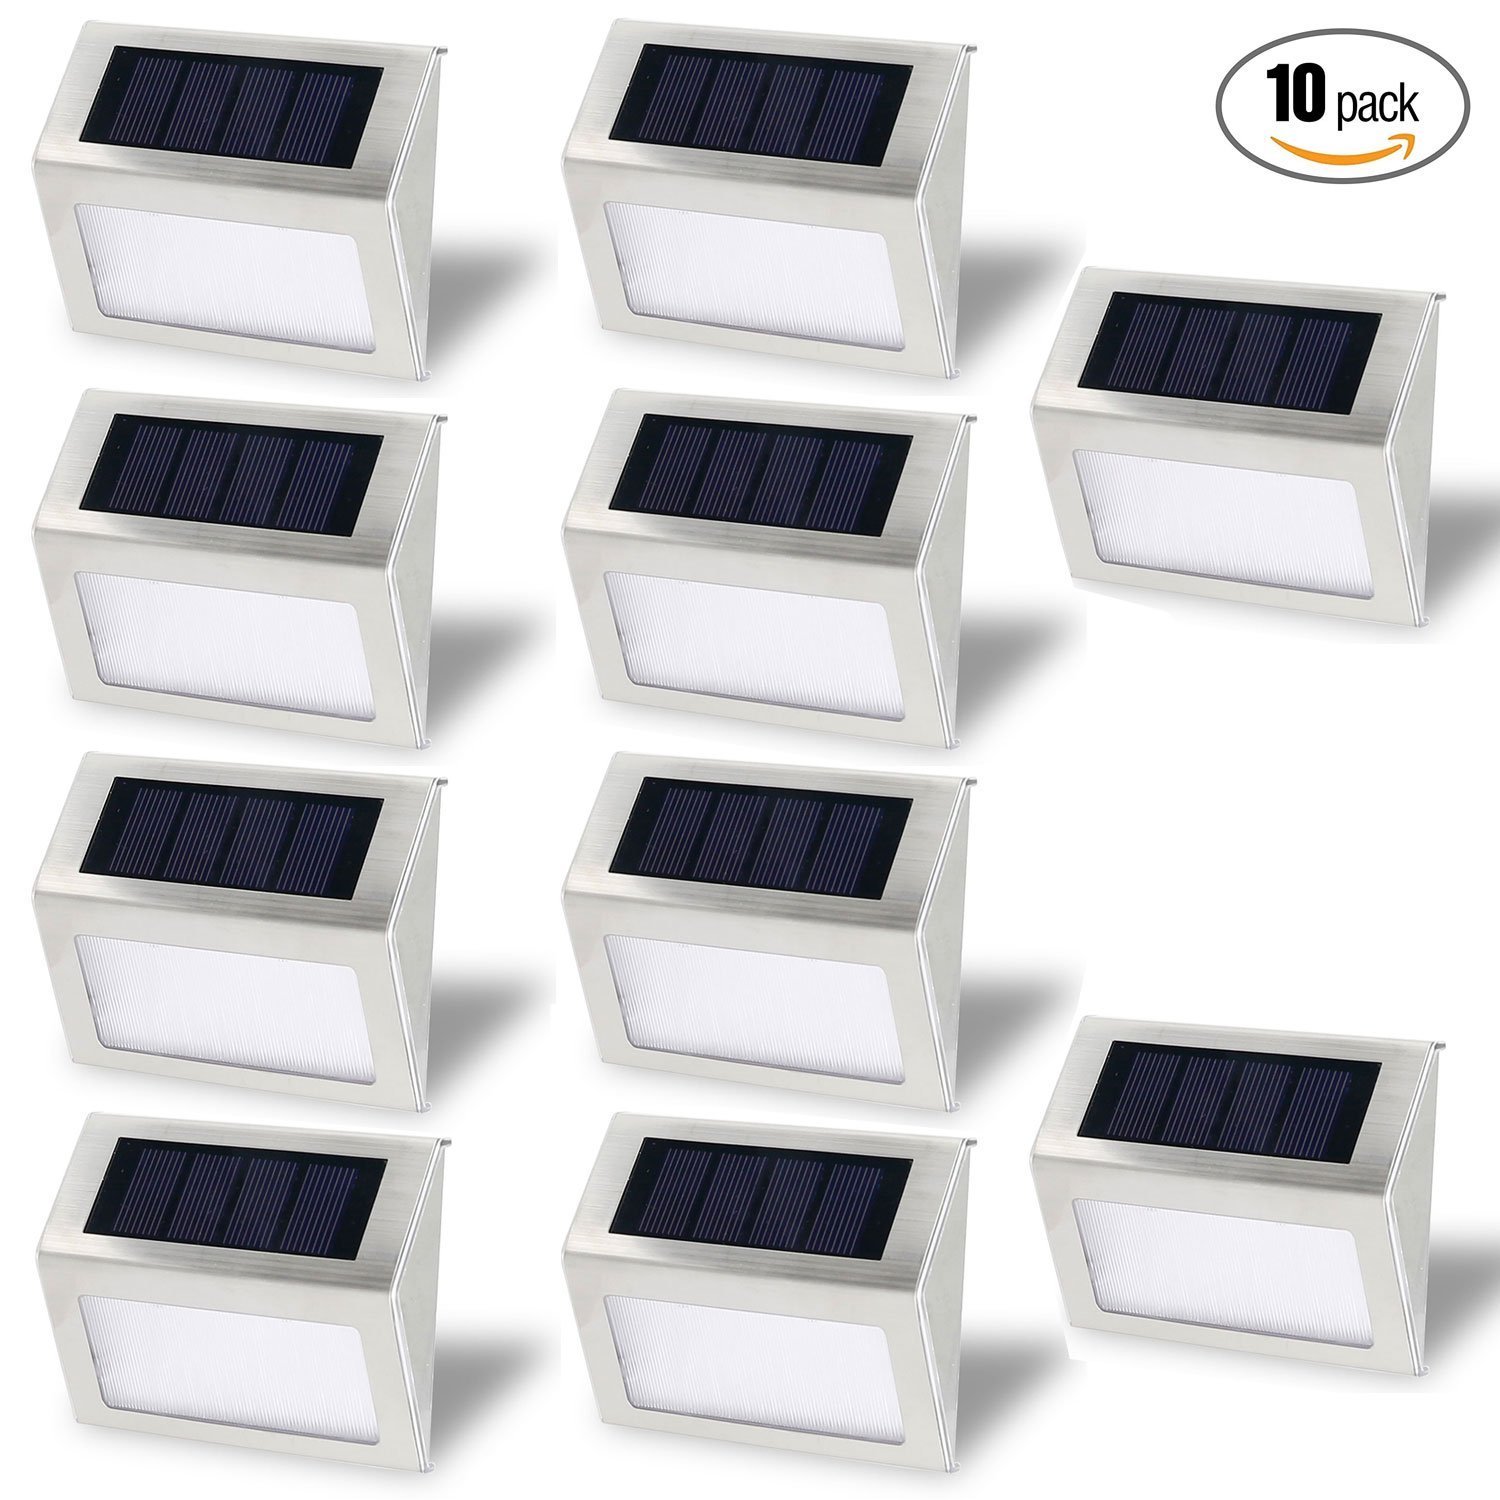 Solar Stair Light, EpicGadget Waterproof Outdoor LED Step Lighting 3 LED Solar Powered Step Lights Stainless Steel Outdoor Lighting for Steps Paths Patio Stairs (Pack 10) - image 1 of 5